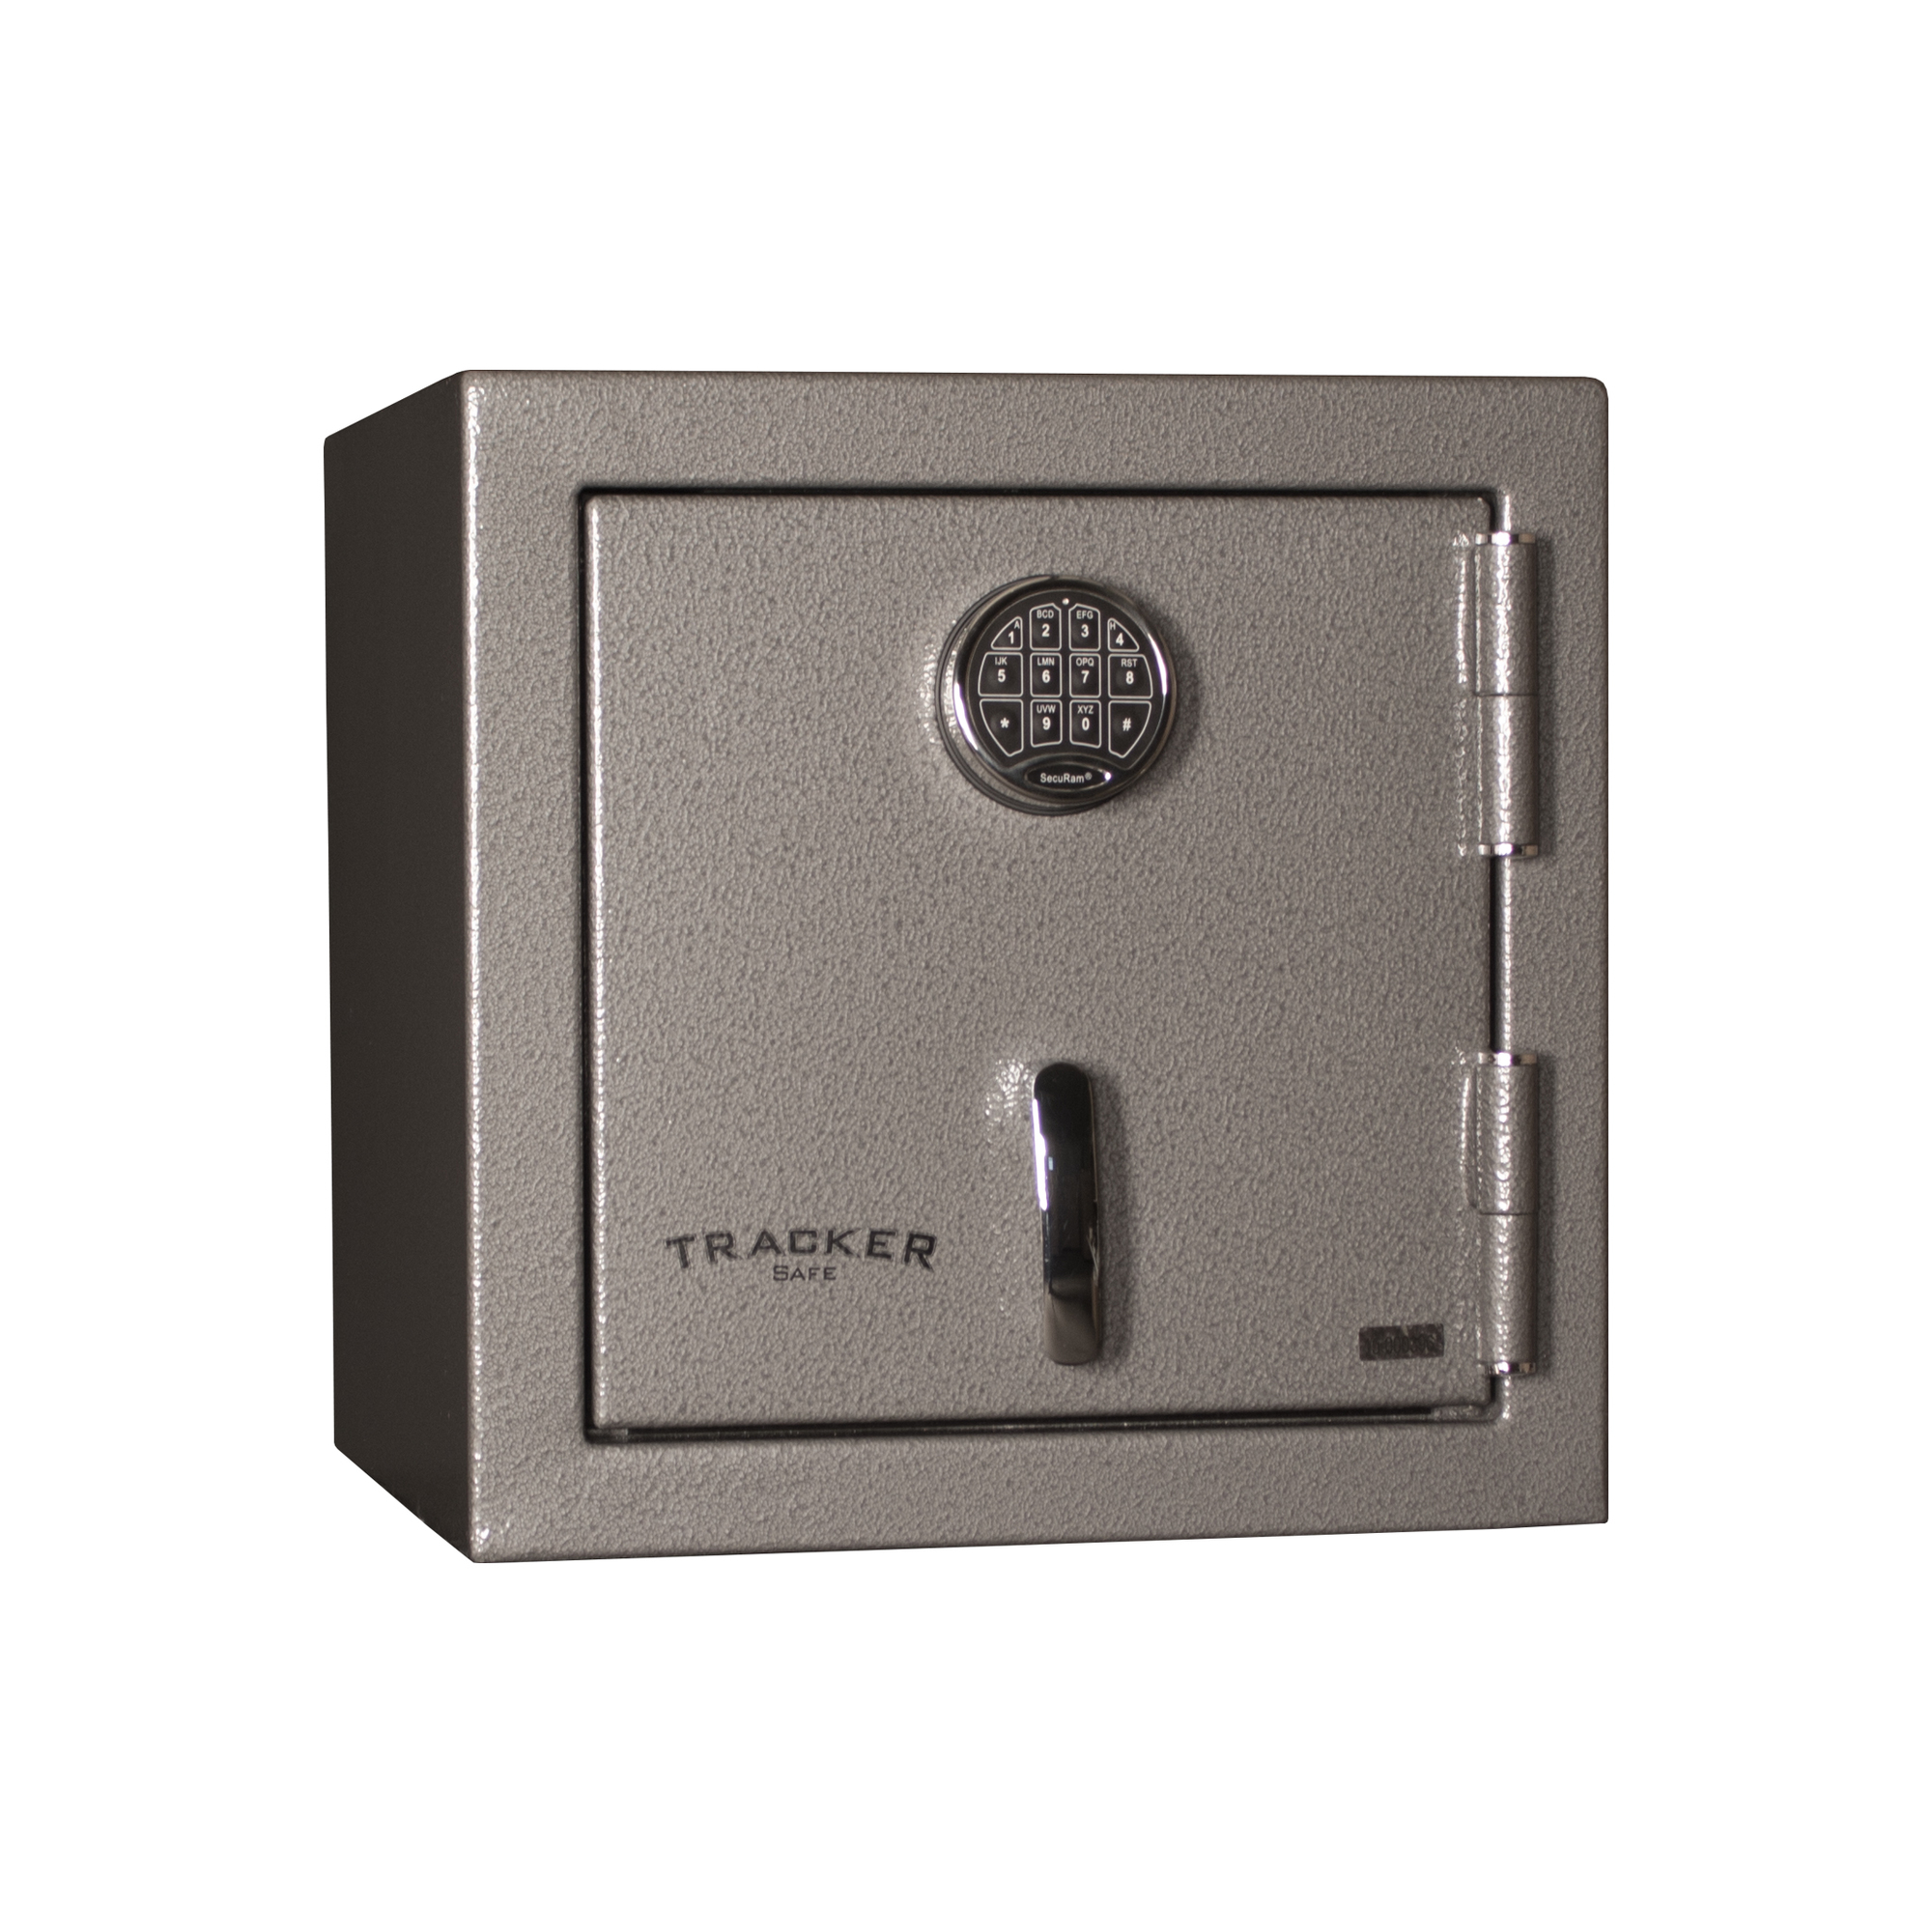 Tracker Safe, 2.14 cu. ft. Fire Resistant Safe, Electronic Lock, Lock Type Electronic, Model HS20